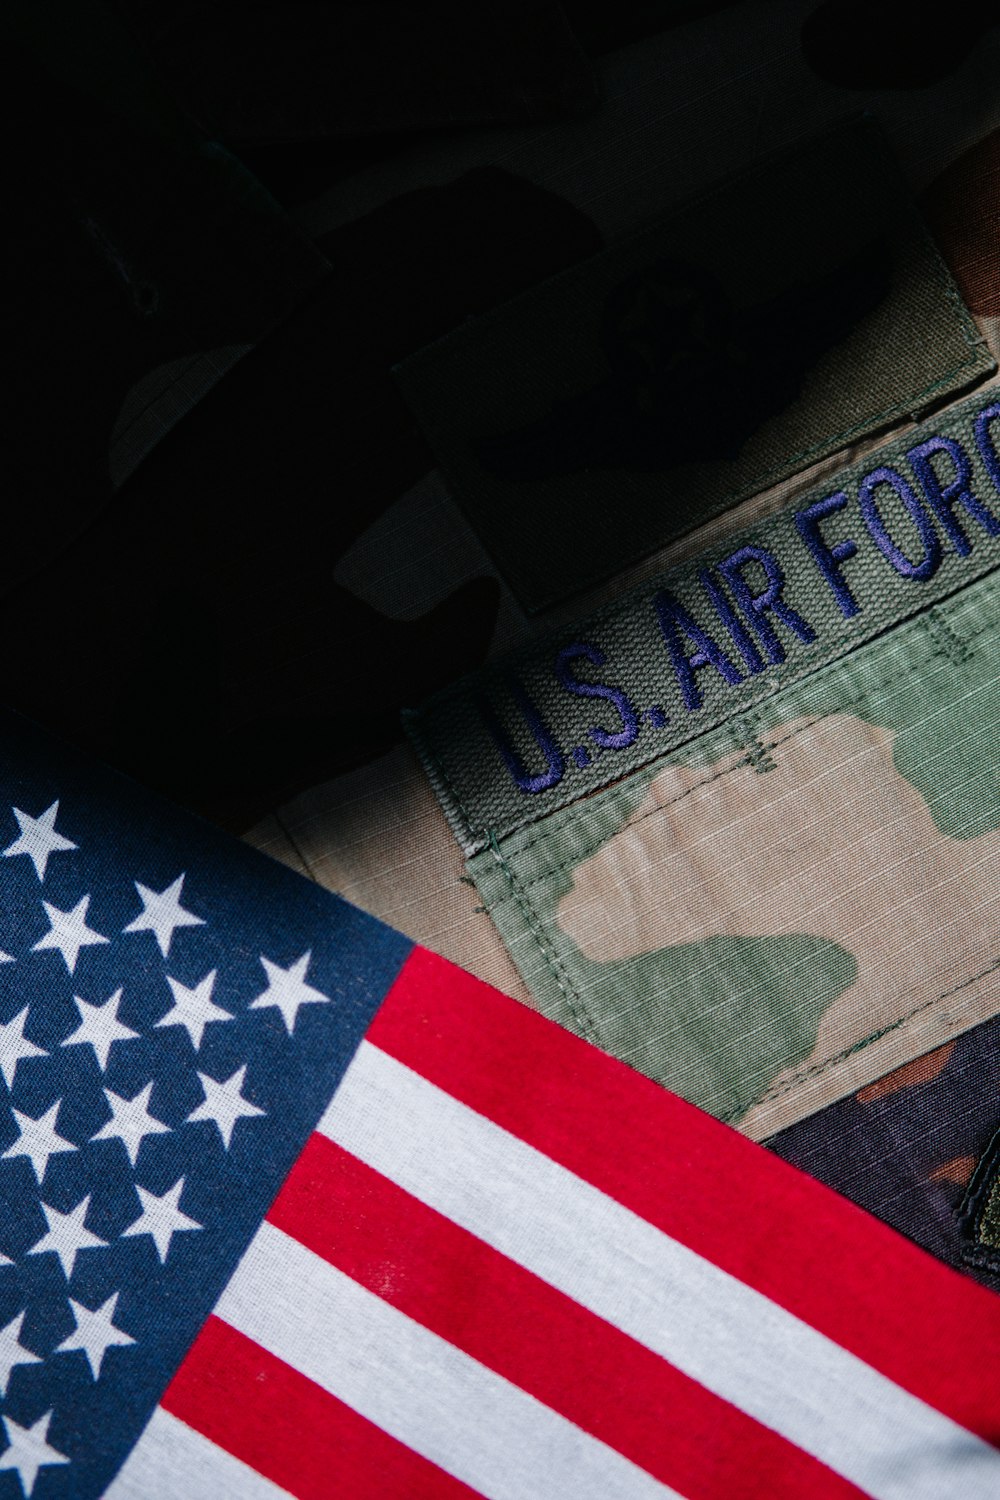 a close up of a us army uniform and an american flag